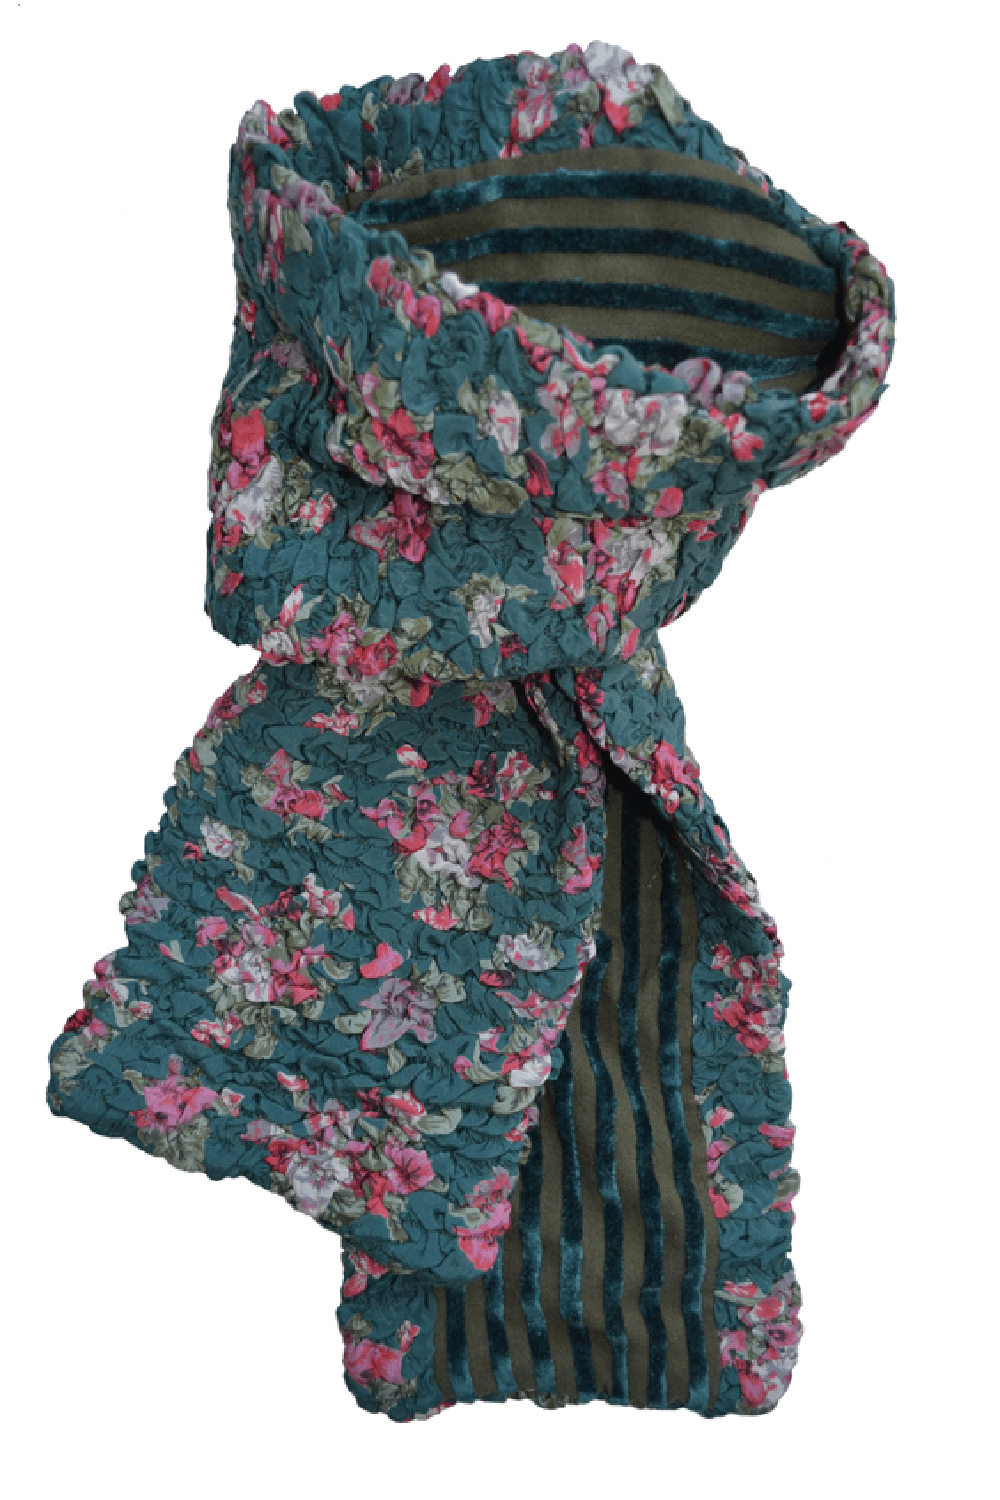 Crinkle Velvet Scarf in a teal colorway with floral pattern on one side and stripe pattern on the other.